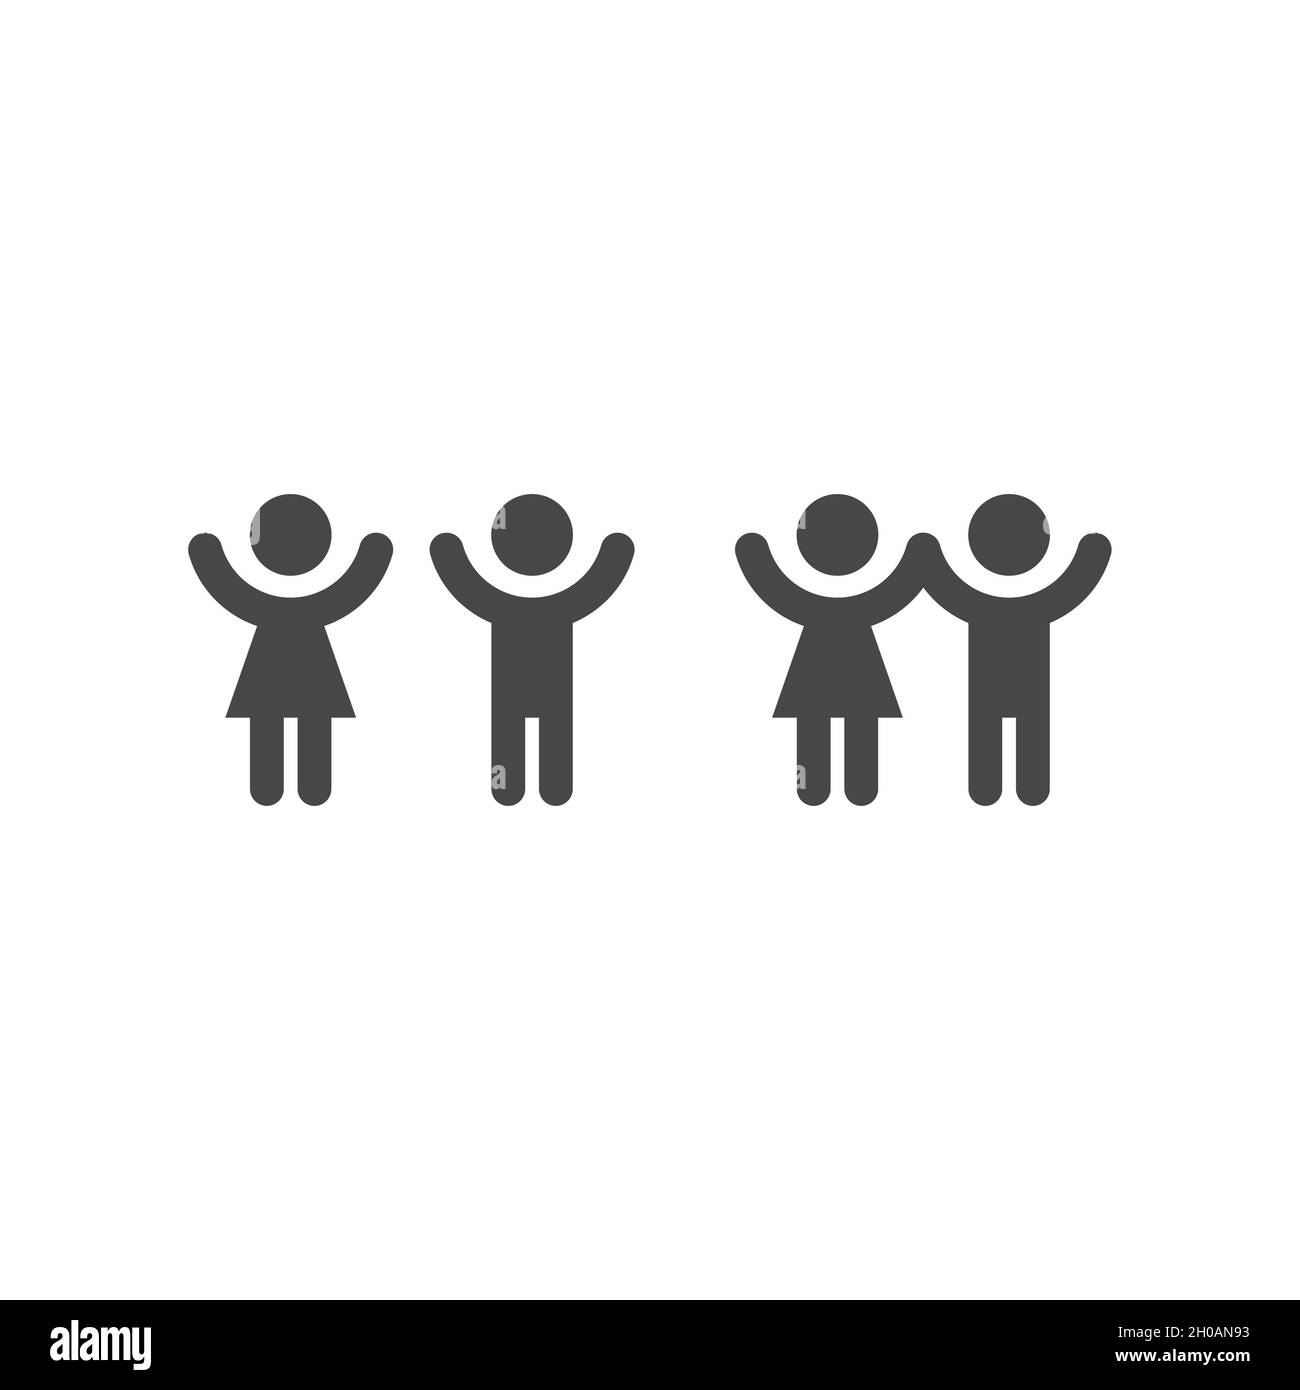 Kids silhouette black vector icon. Children, boy and girl, holding hands symbol. Stock Vector